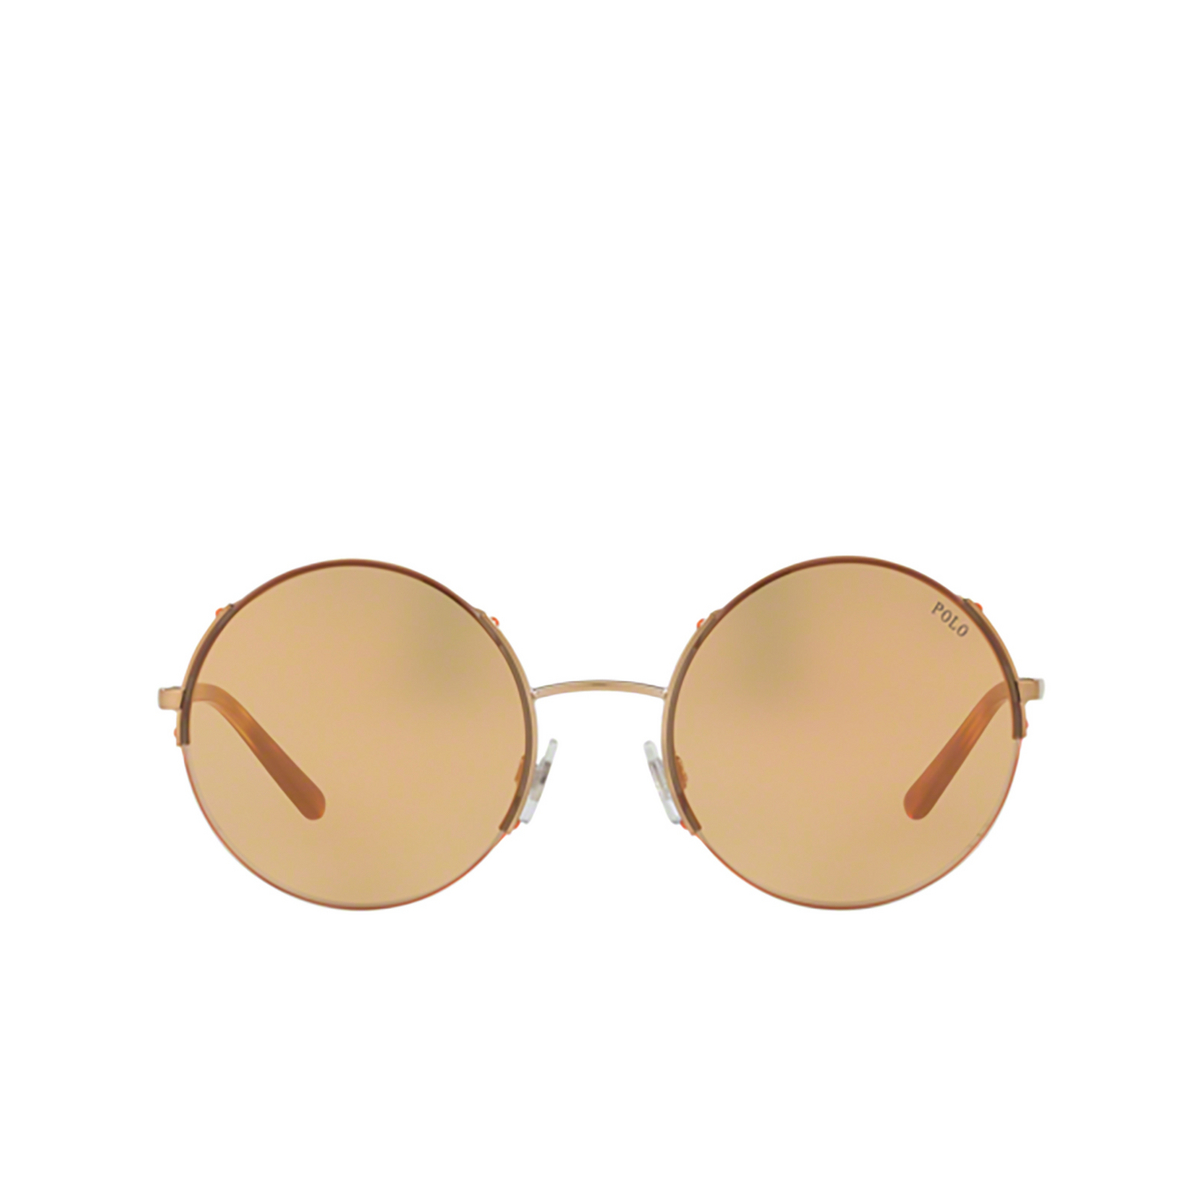 Polo Ralph Lauren® Round Sunglasses: PH3120 color Shiny Rose Gold 9334R1 - front view.